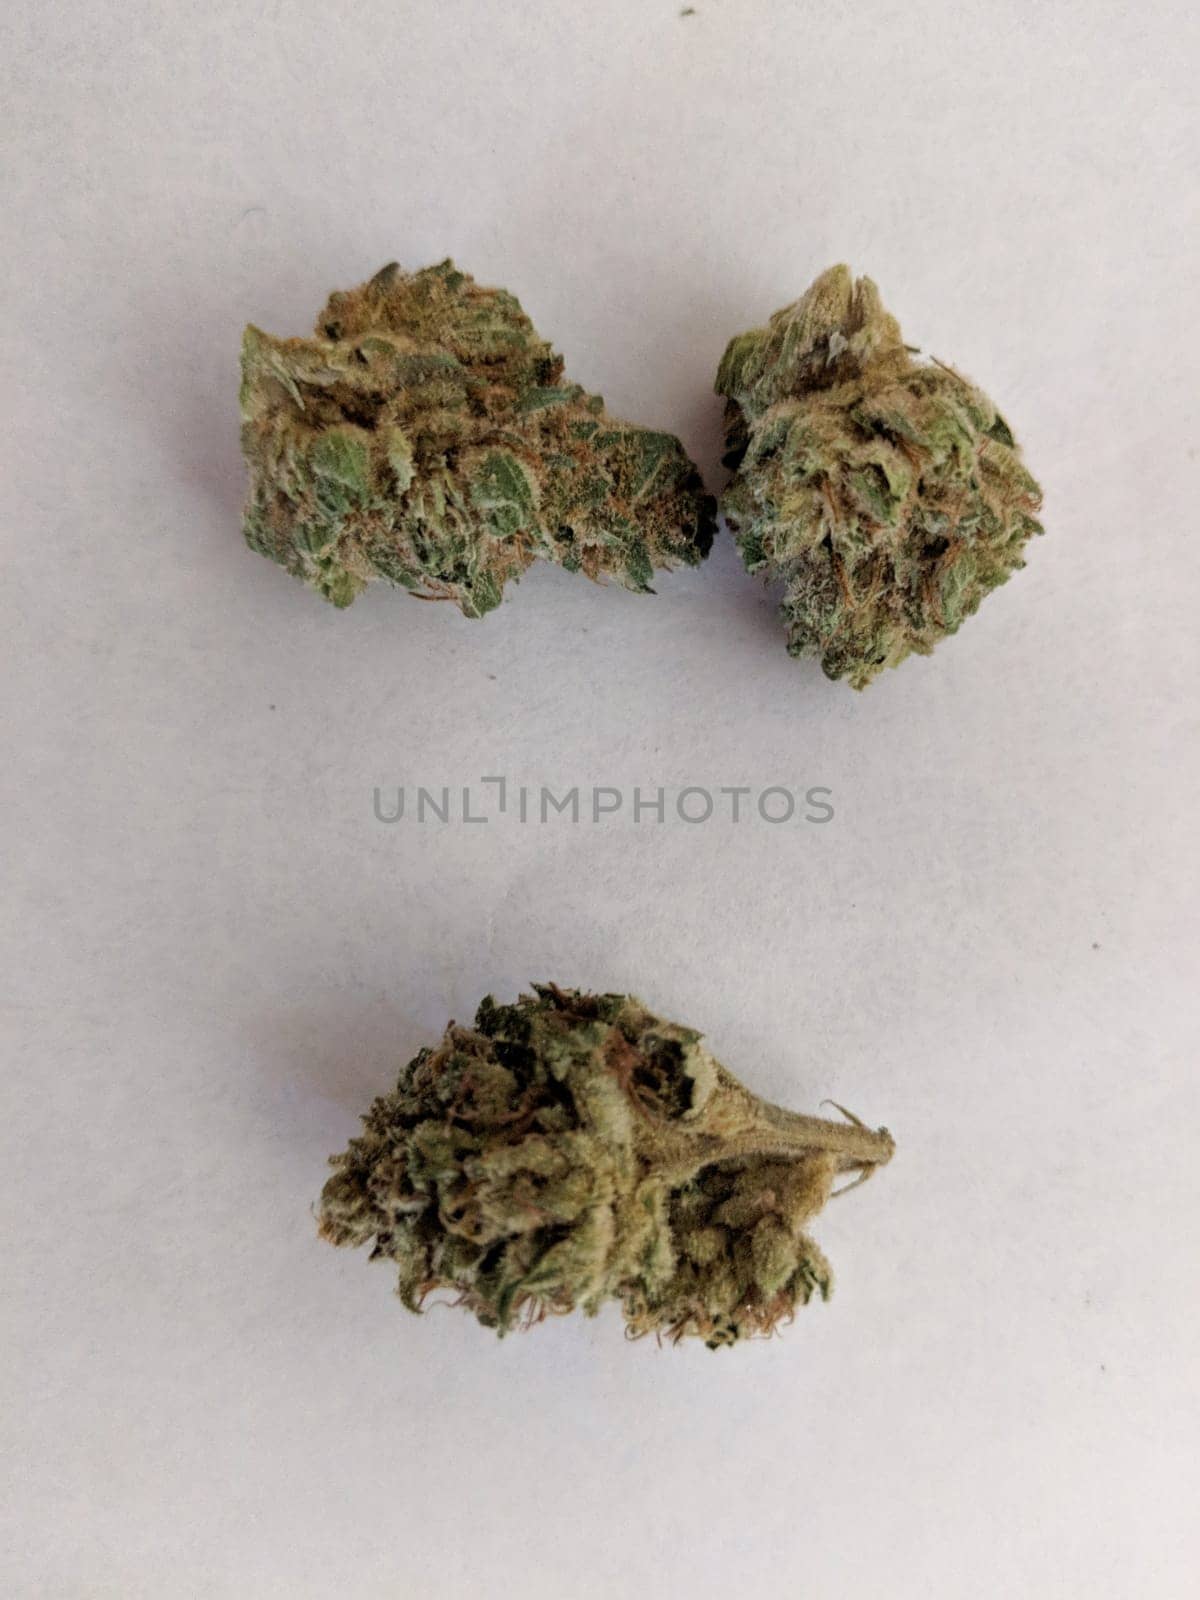 Three buds of marijuana on a white surface by EricGBVD